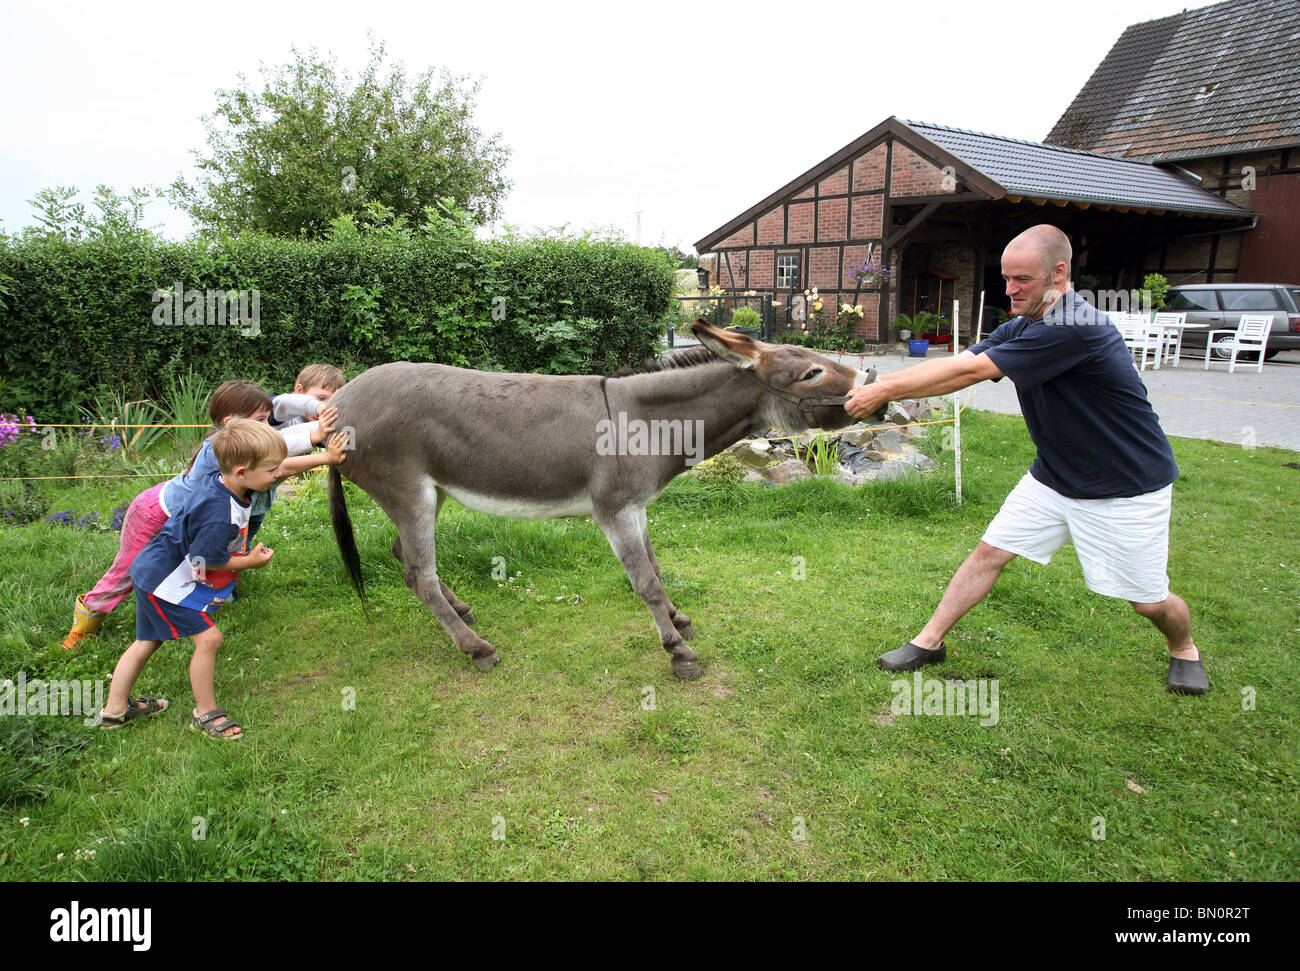 a-man-with-kids-try-to-make-a-stubborn-donkey-move-BN0R2T.jpg